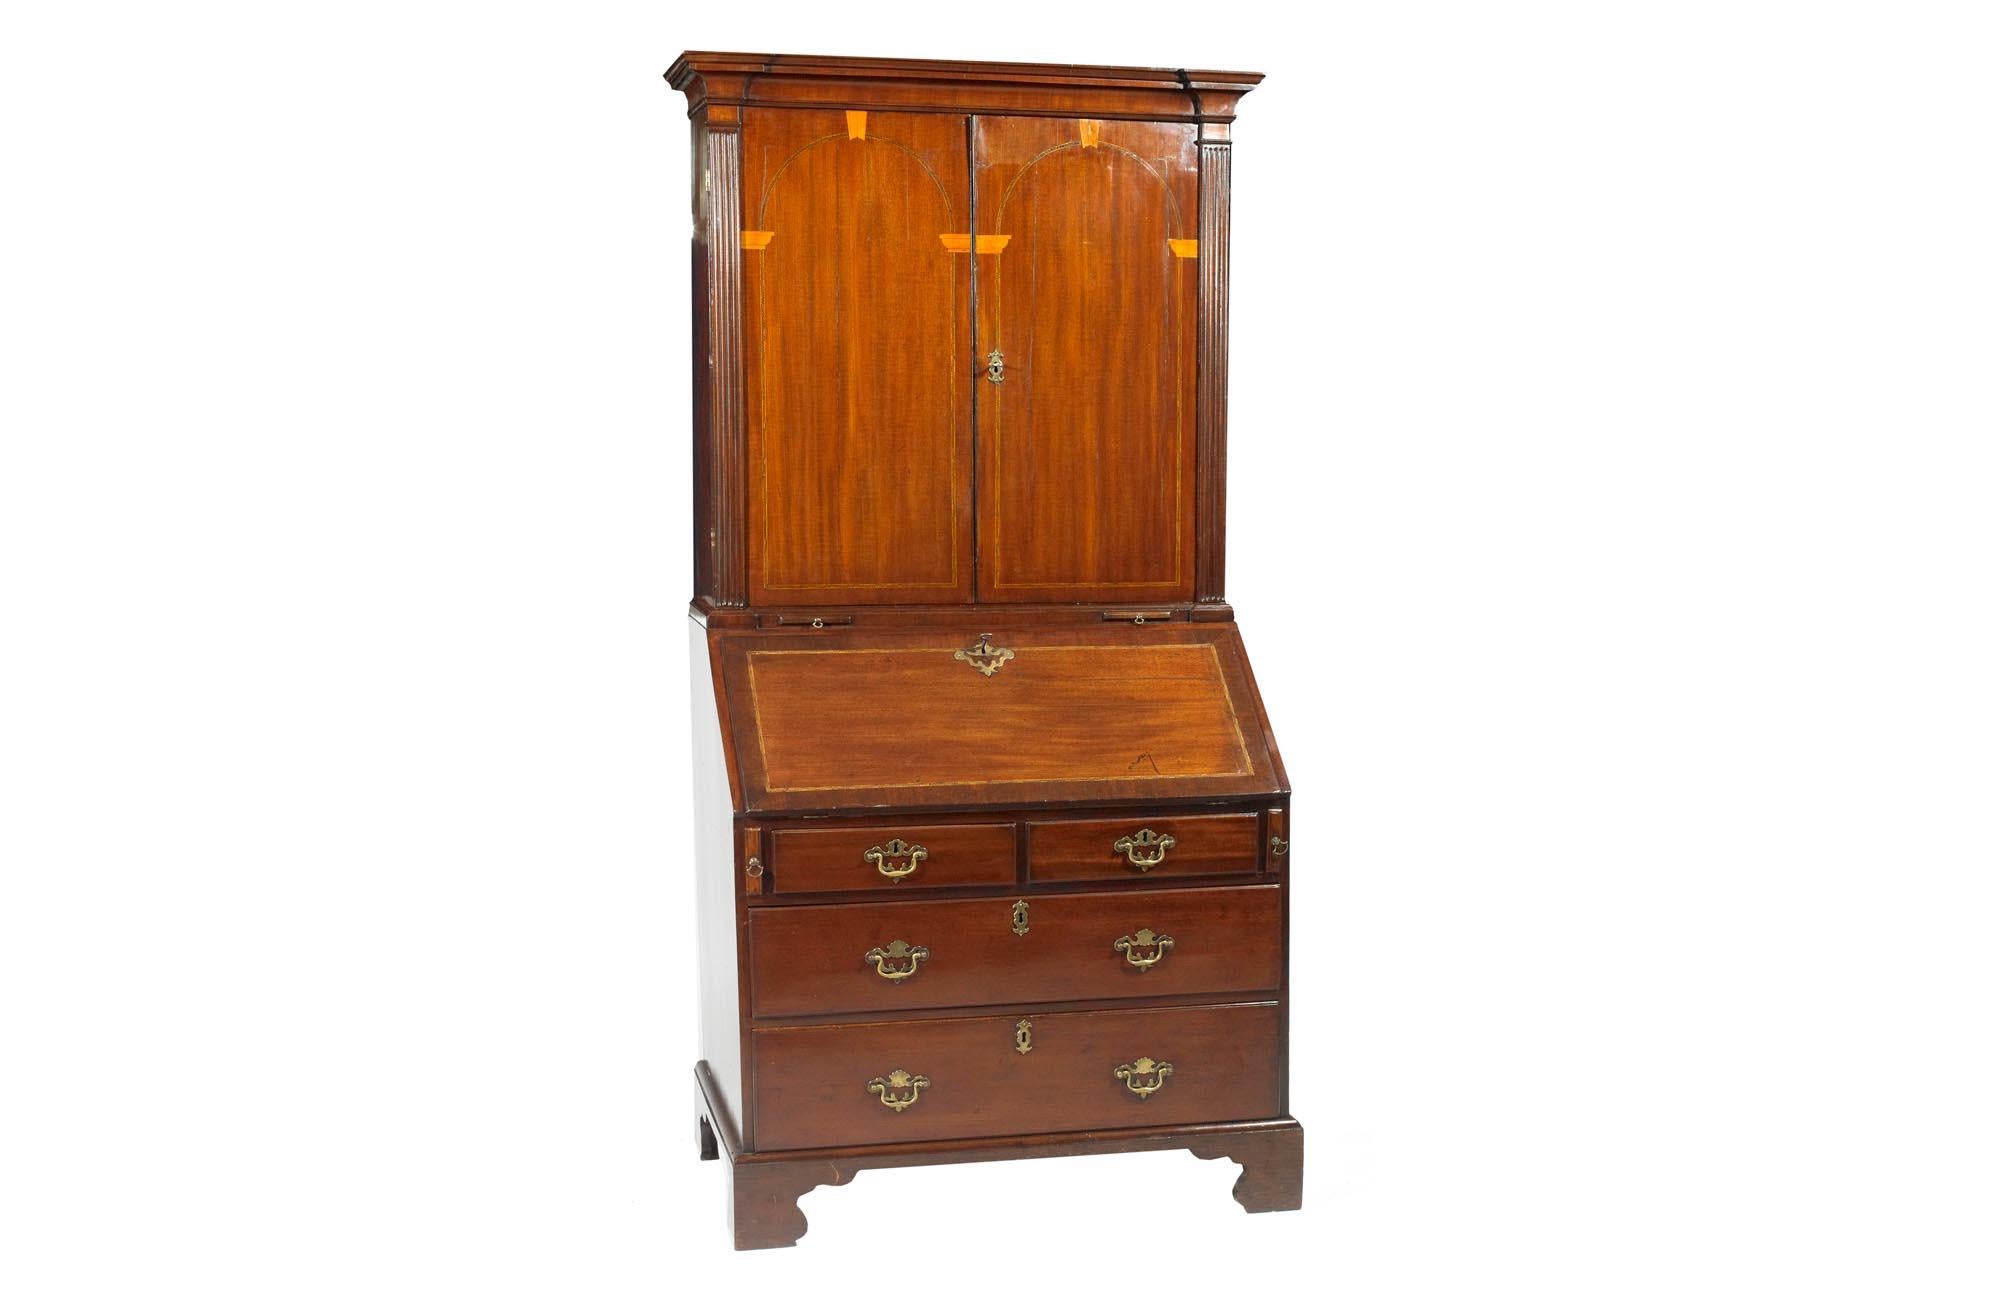 Early 19th Century George III Mahogany Bureau Bookcase In Good Condition For Sale In Dublin 8, IE